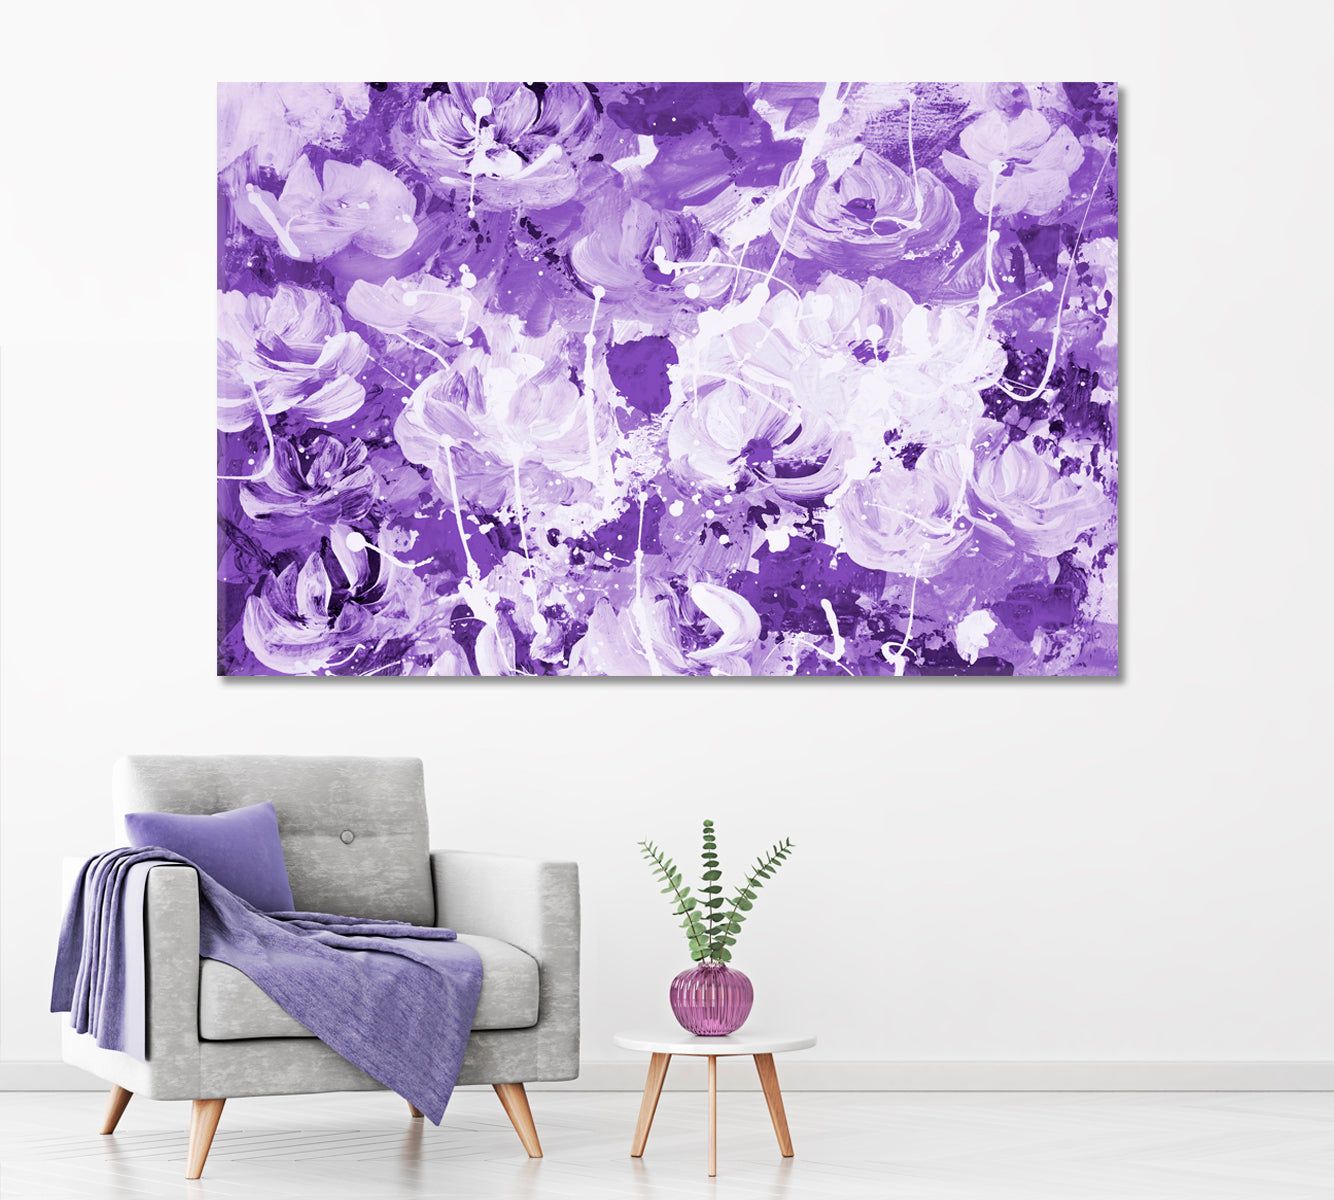 Violet Abstract Flowers Canvas Print ArtLexy 1 Panel 24"x16" inches 